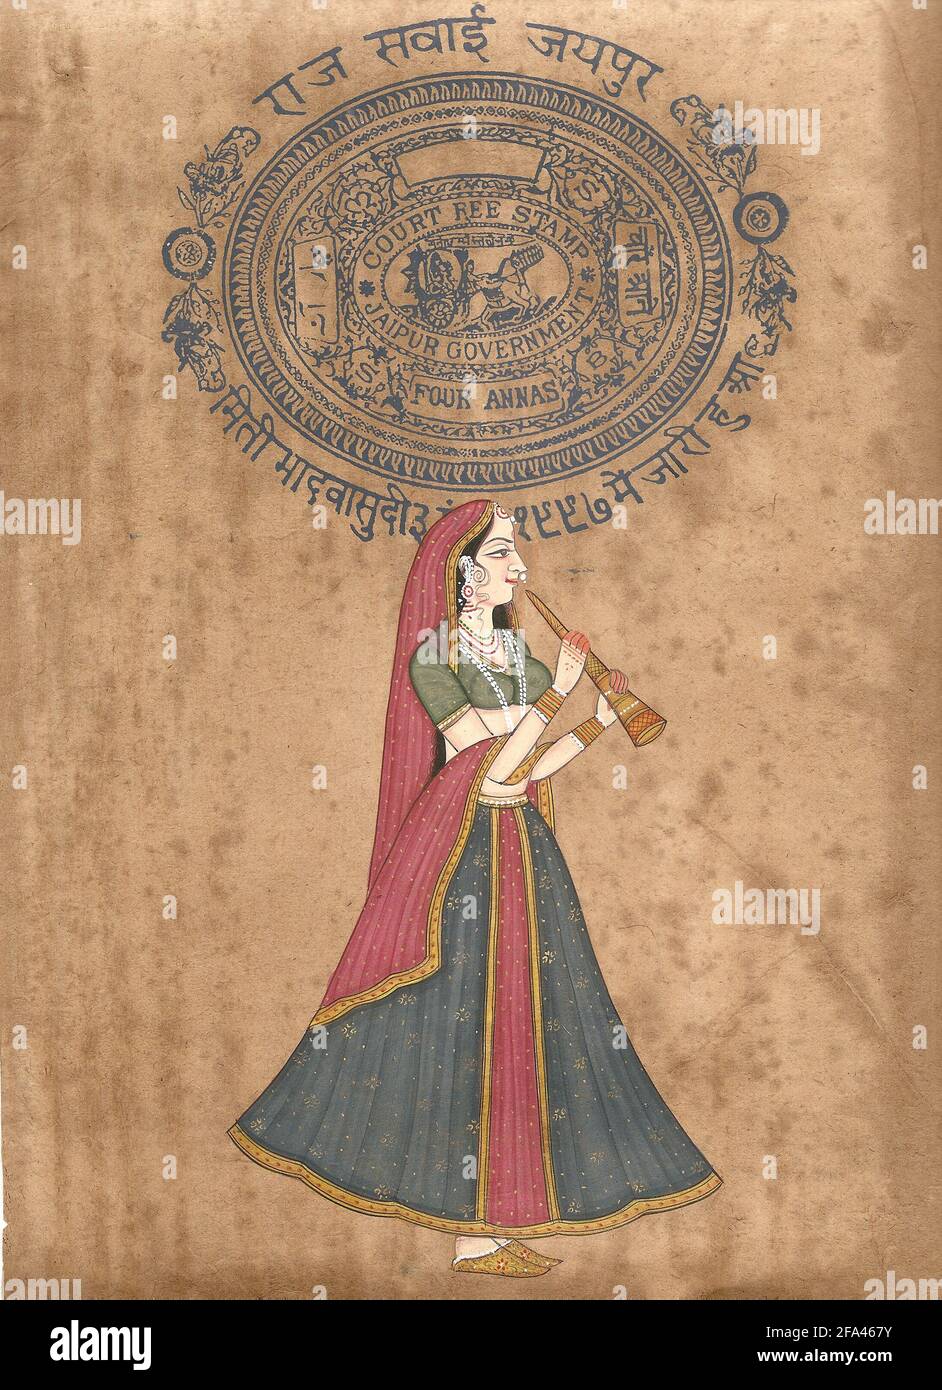 Young Indian woman playing a flute, Indian miniature painting on 19th century paper. Udaipur, India Stock Photo